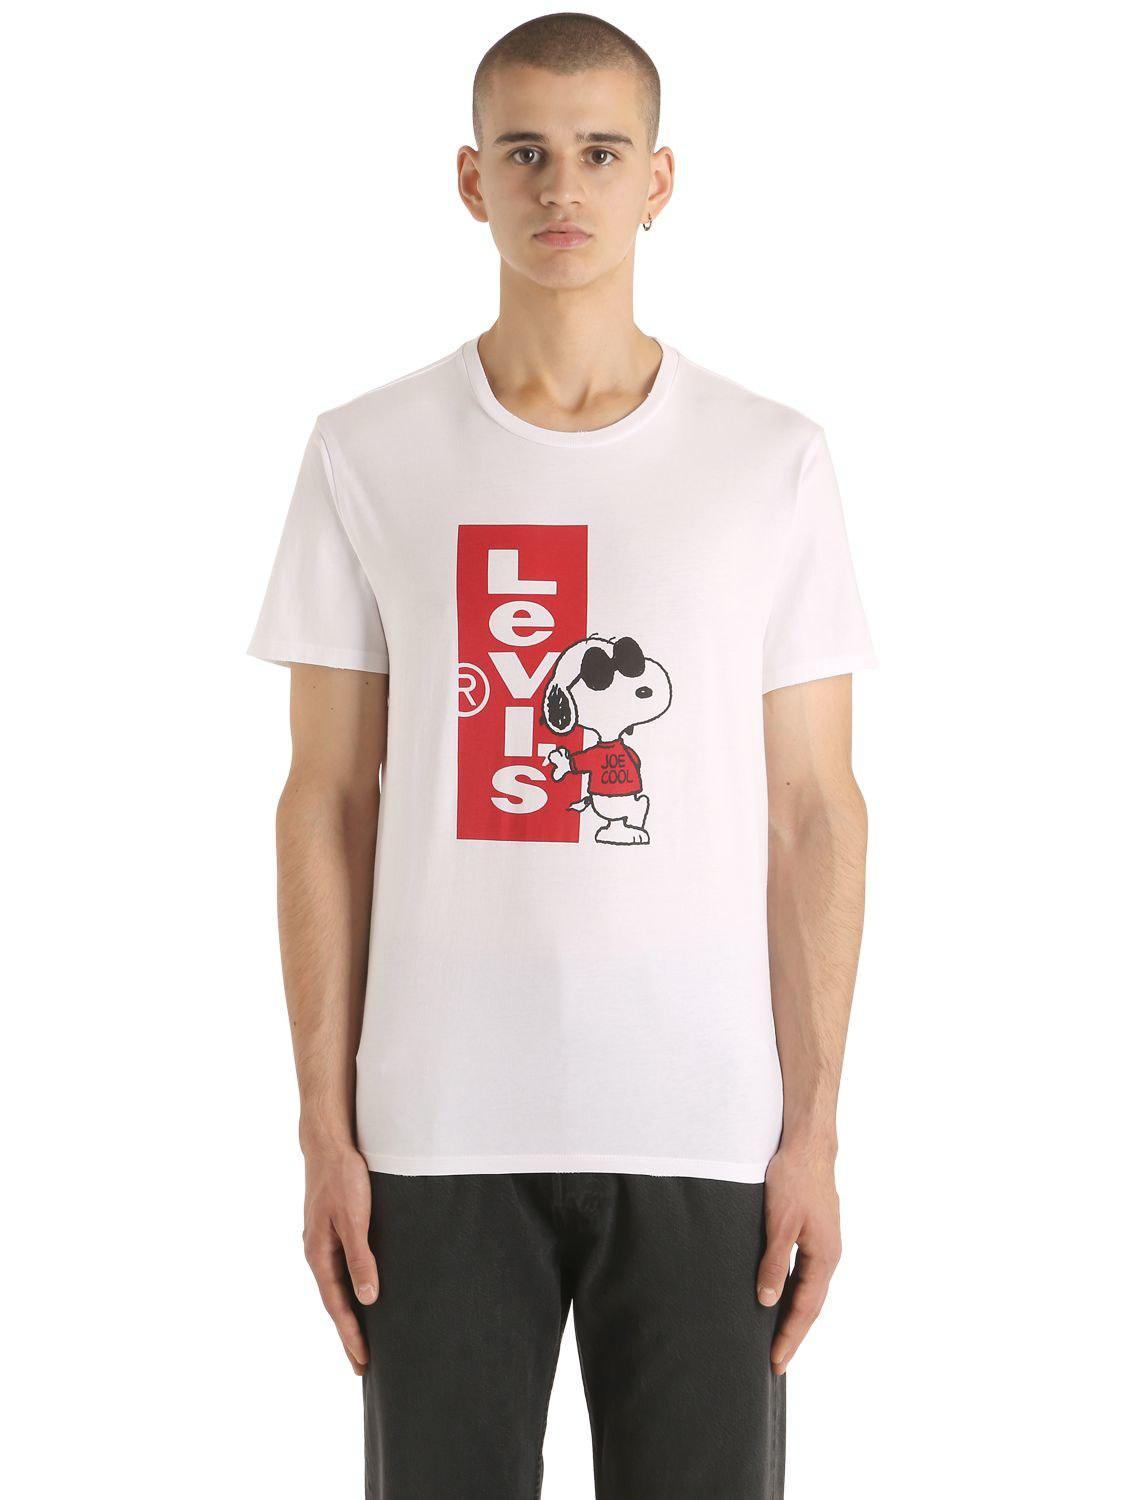 Levi Snoopy Shirt Top Sellers, UP TO 53% OFF | www.realliganaval.com